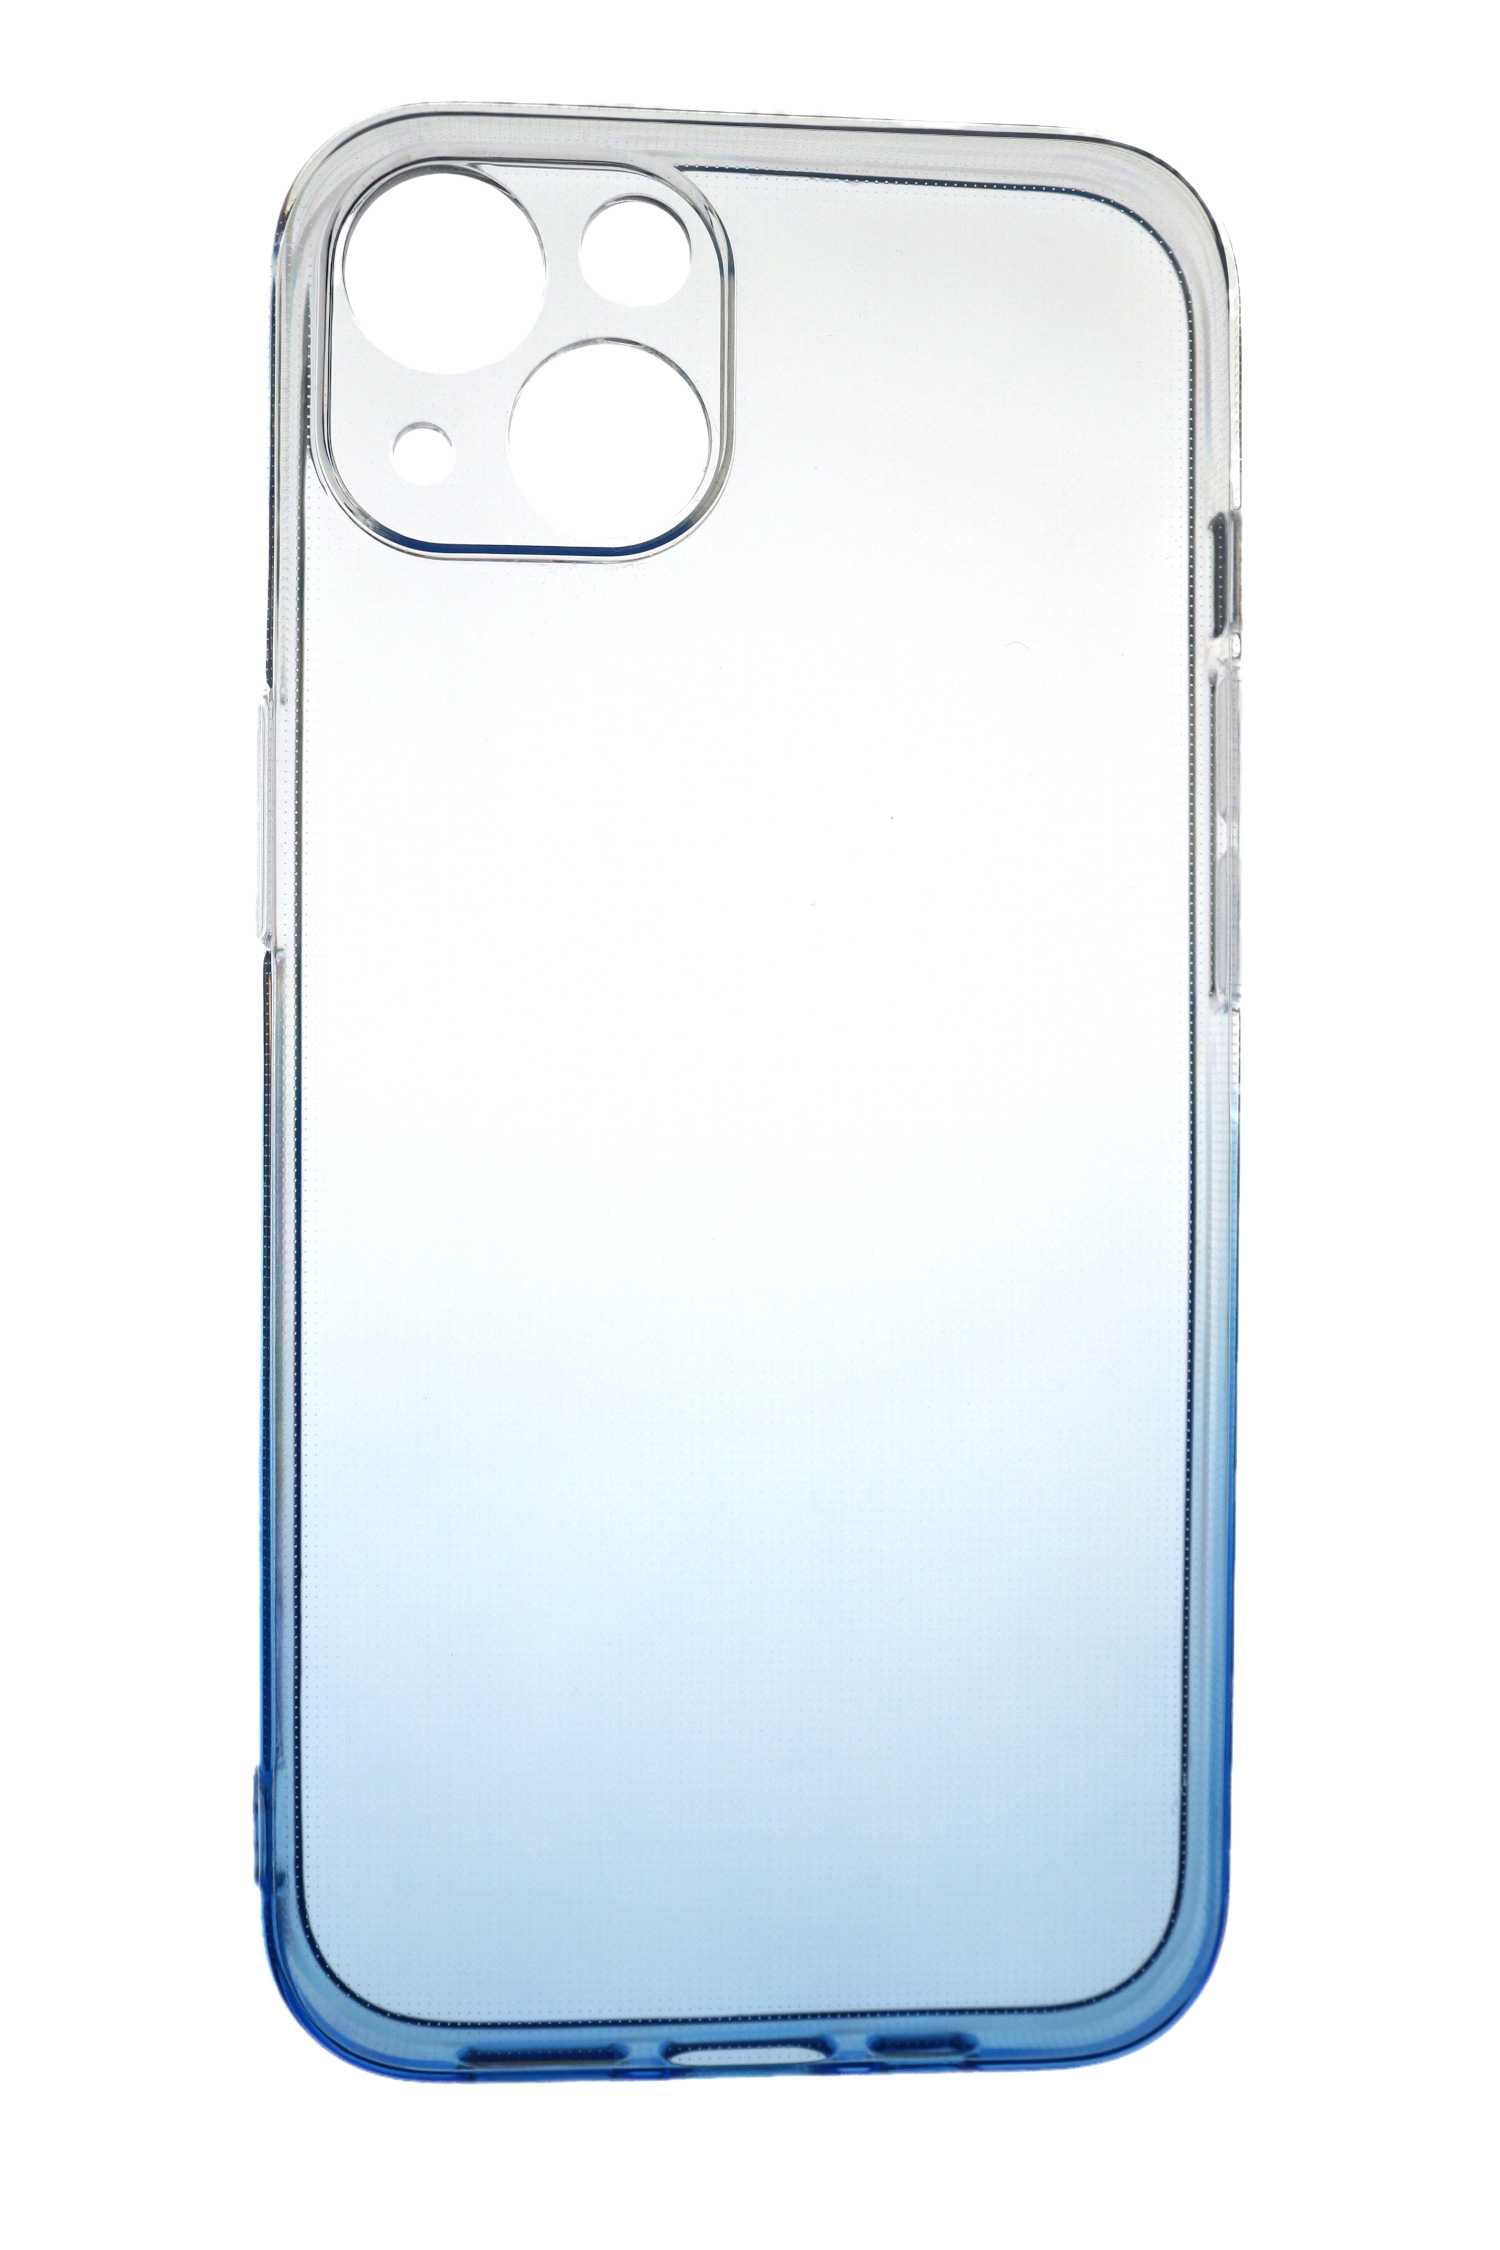 JAMCOVER 2.0 mm iPhone Case Apple, Backcover, Strong, TPU Blau, Transparent 14